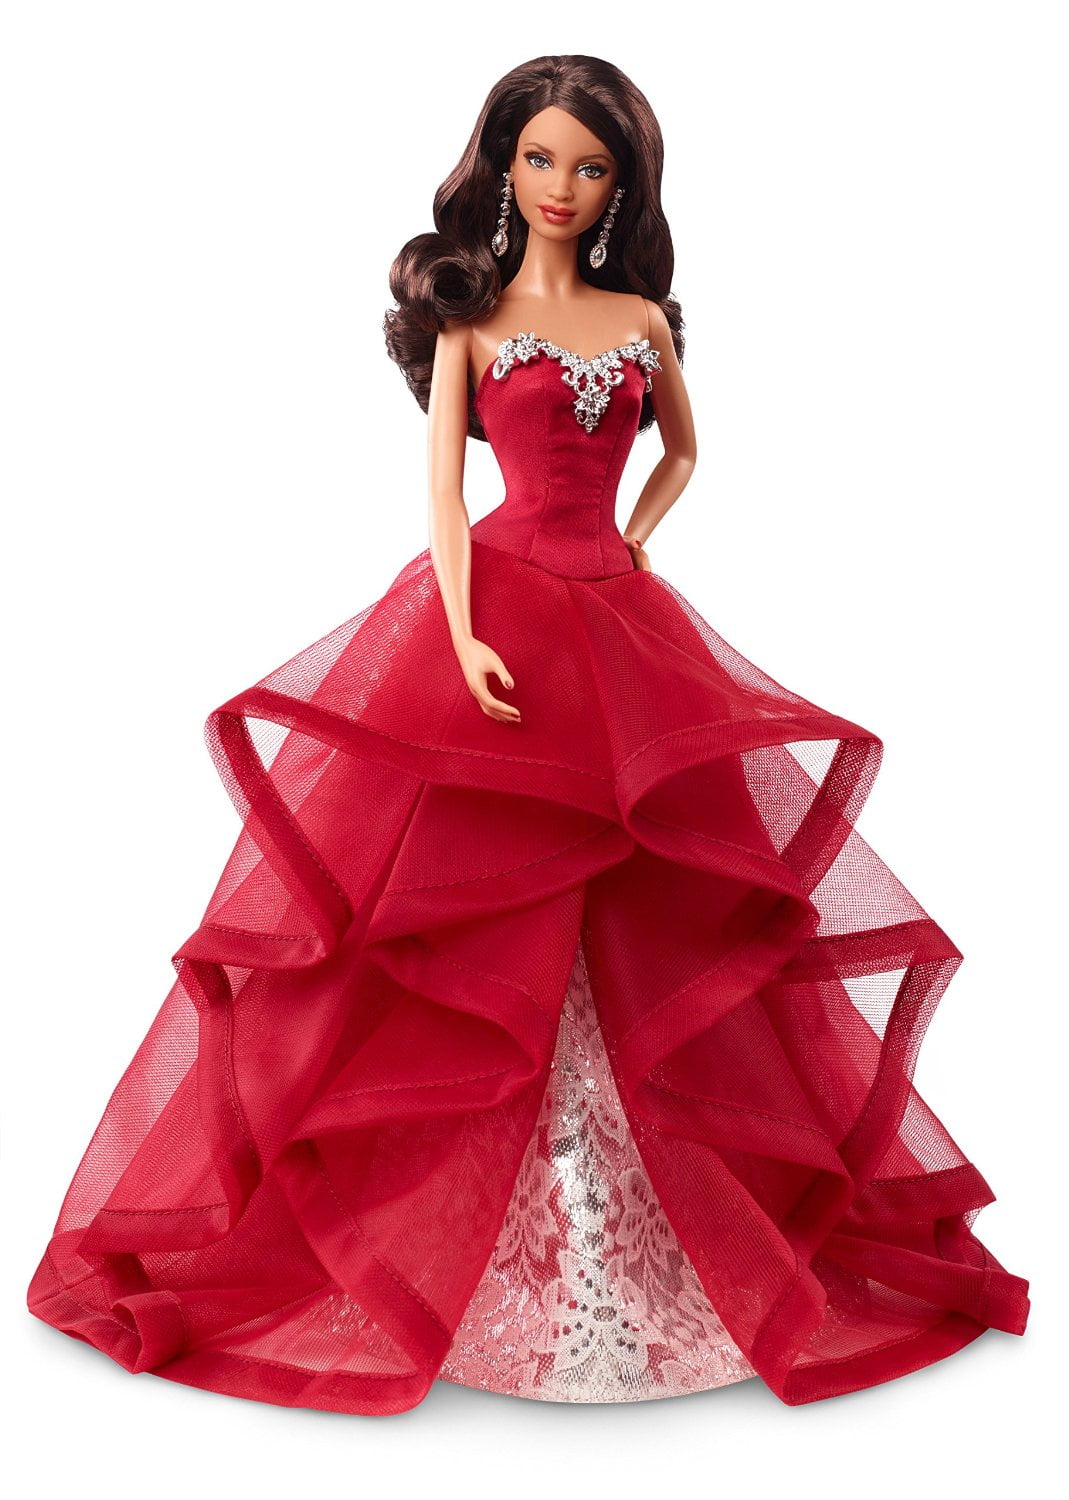 Barbie Collector 2015 Holiday African-American Doll - Walmart.com